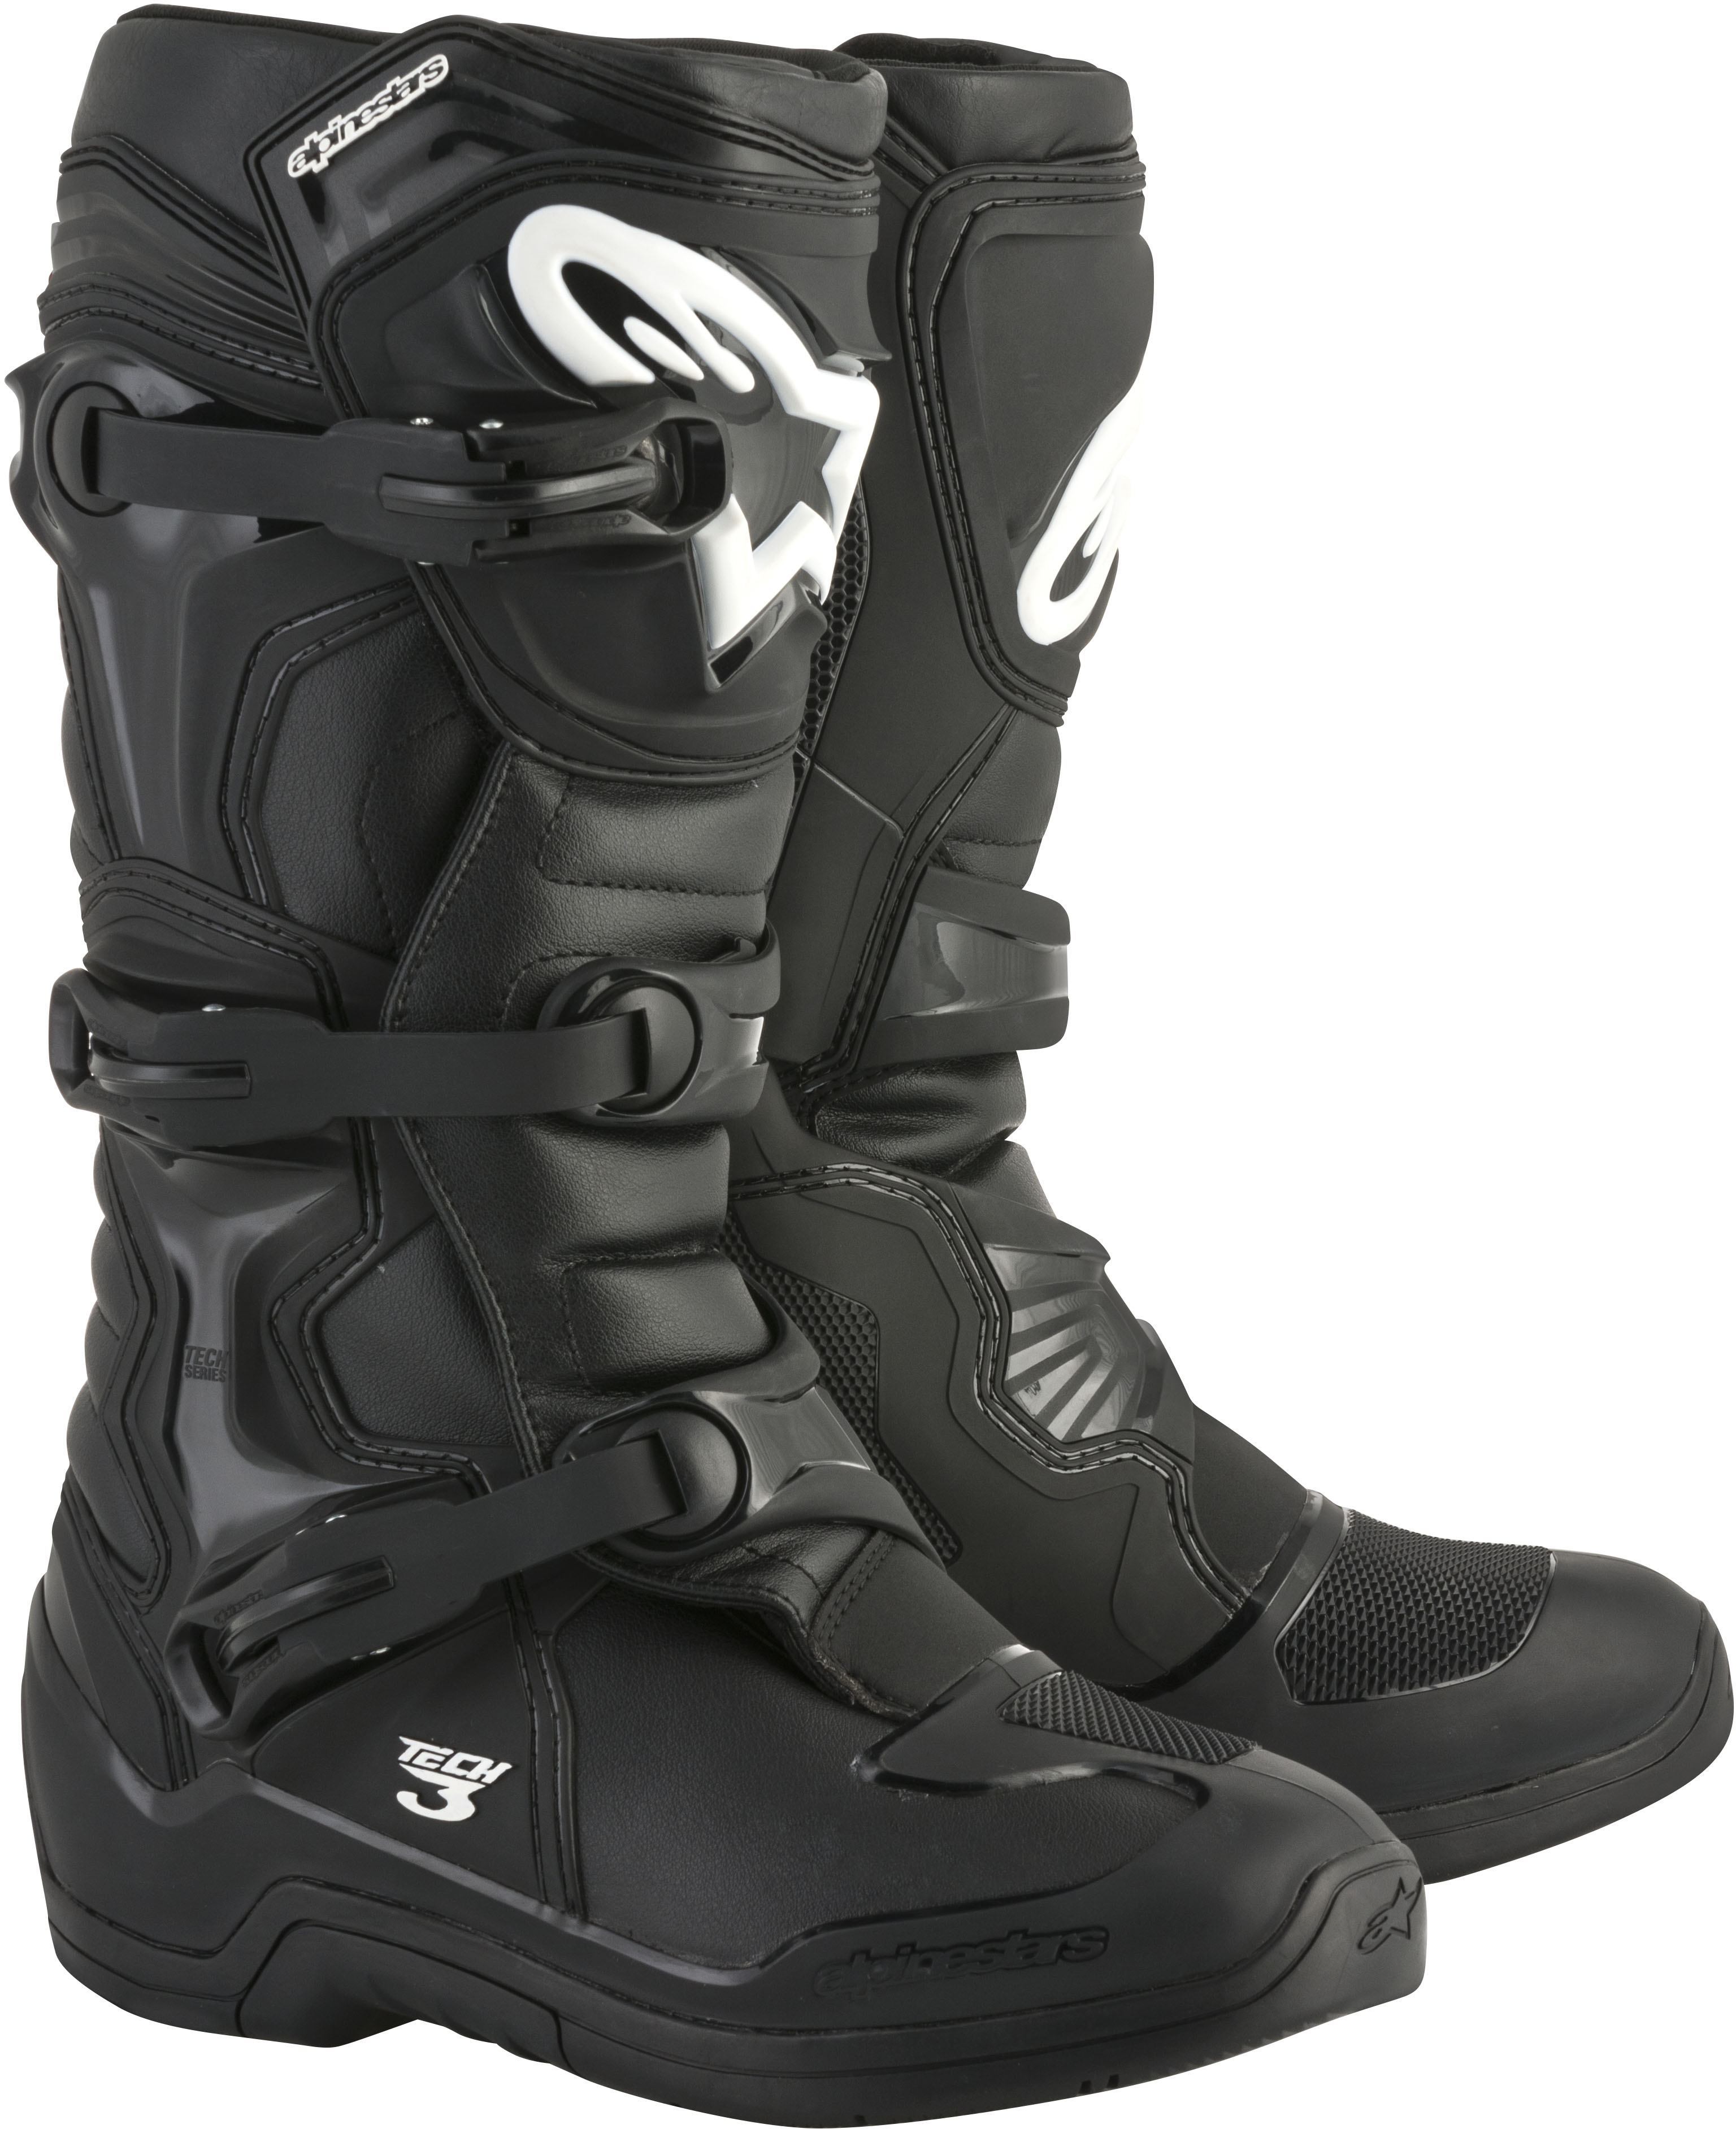 Tech 3 Boots Black Size 13 - Click Image to Close